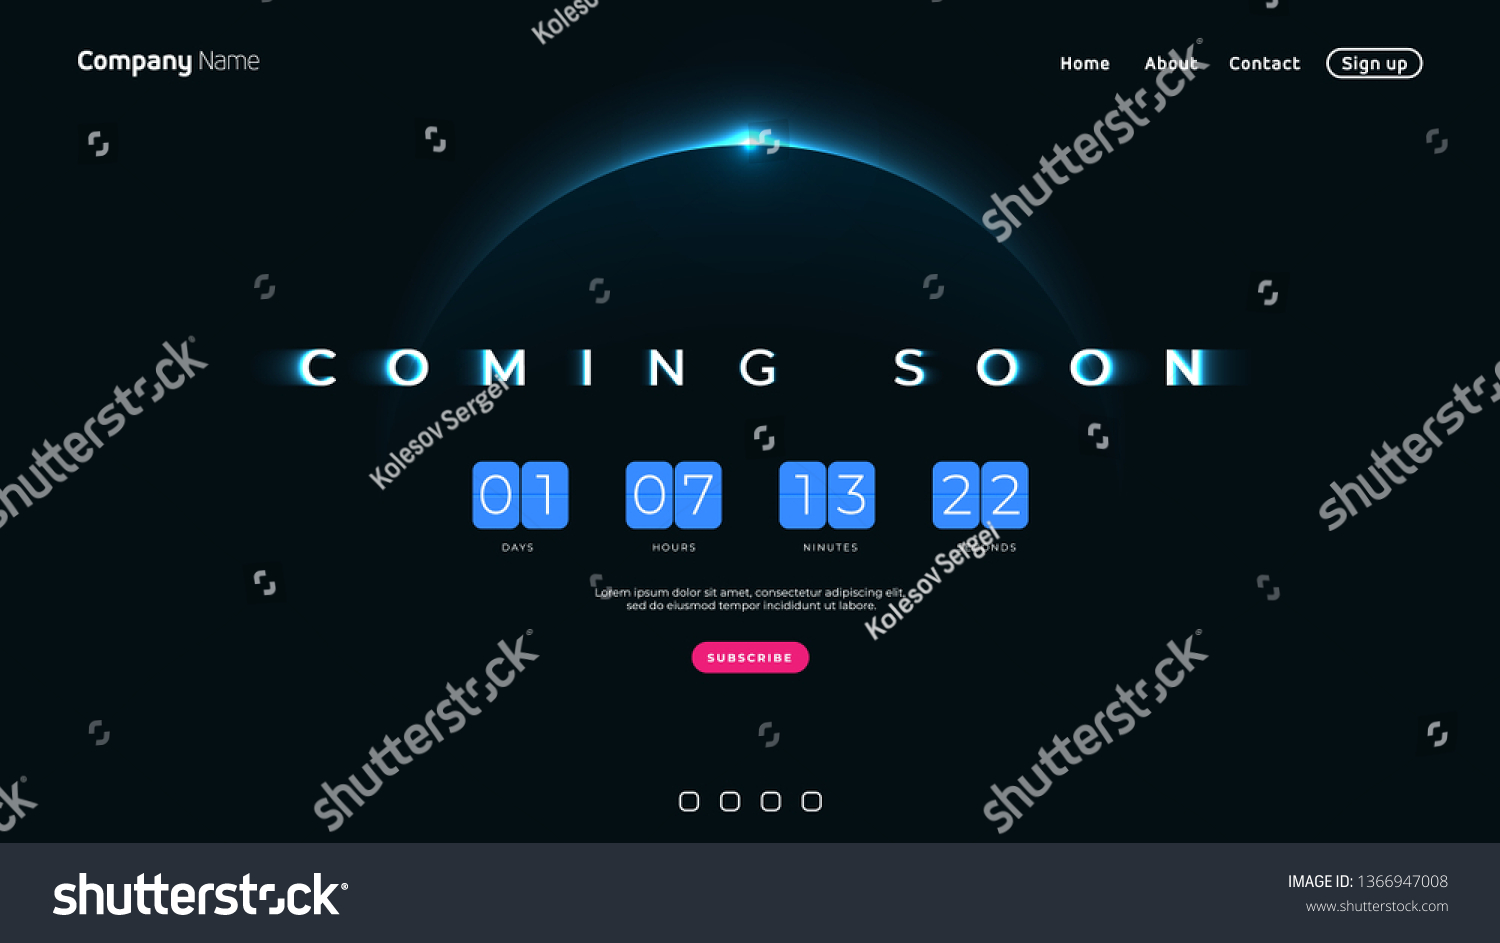 SVG of Coming Soon text on abstract Sunrise Dark Background with Flip countdown clock counter timer. Design Concept for sale, web, promotion announce, template design, under constuction page. svg